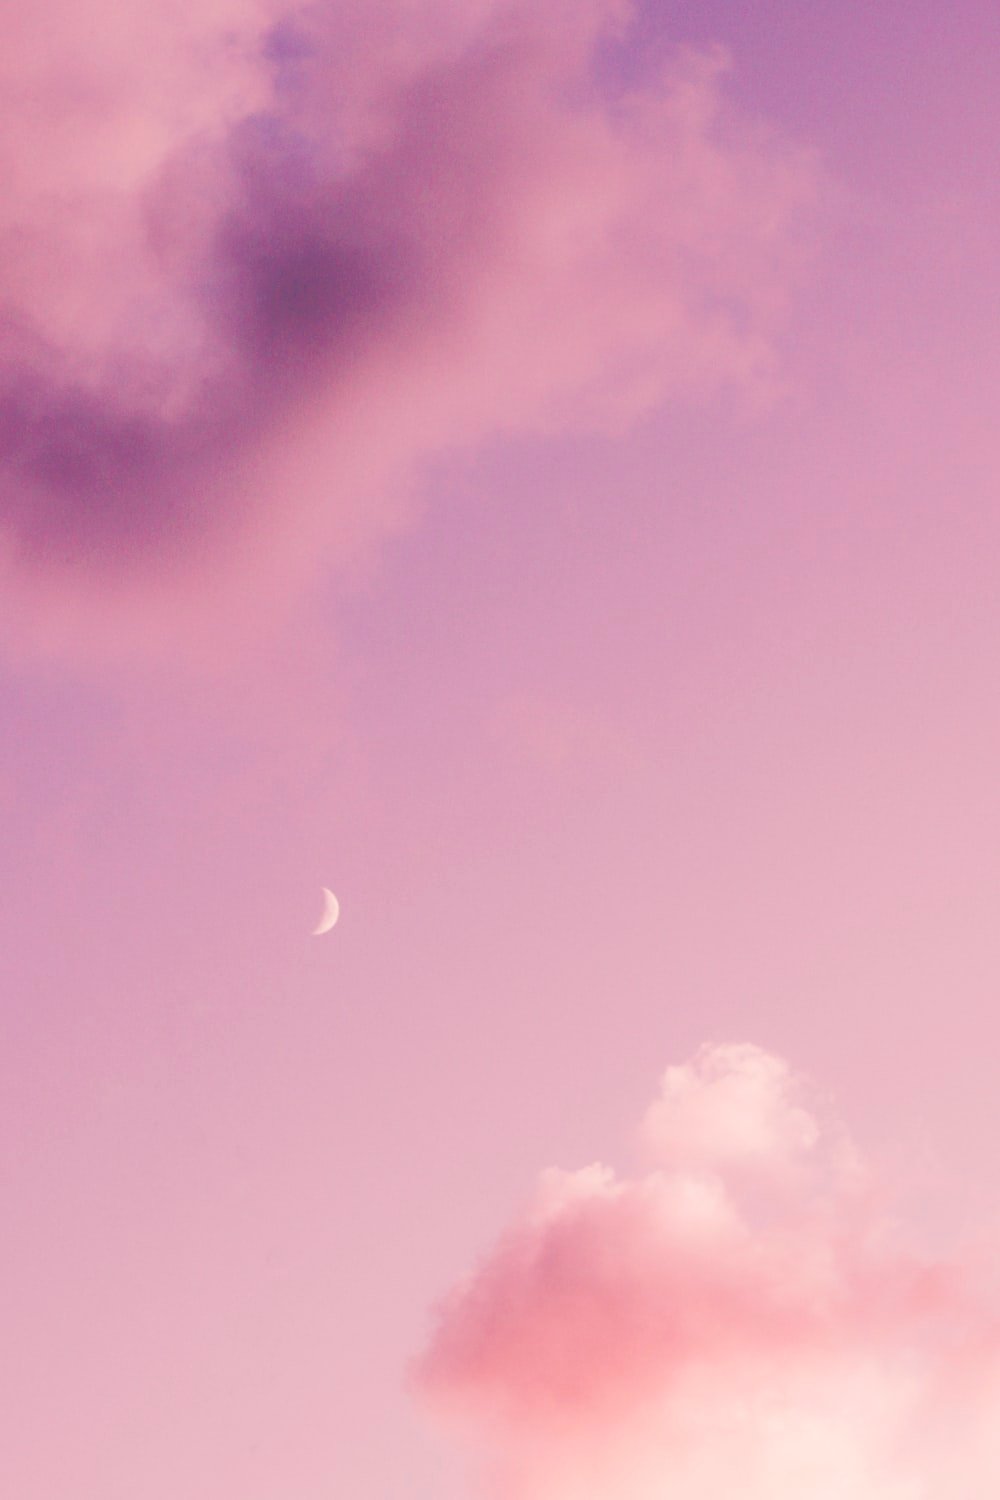 Pink Sky Picture. Download Free Image